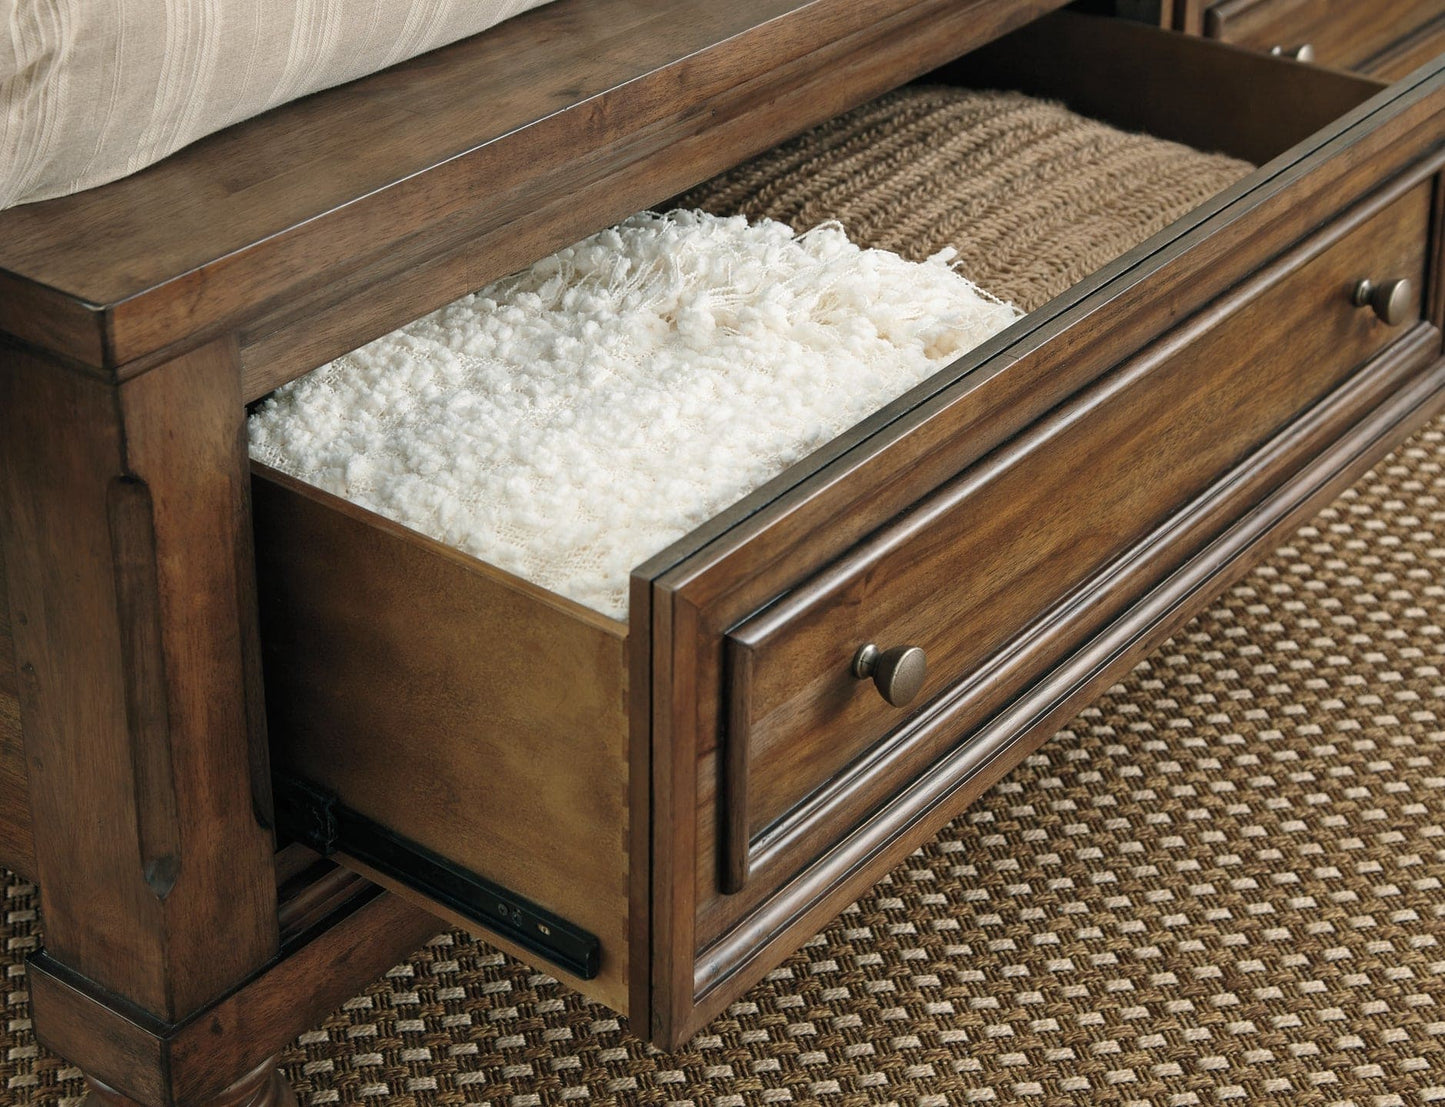 Flynnter  Panel Bed With Mirrored Dresser, Chest And Nightstand